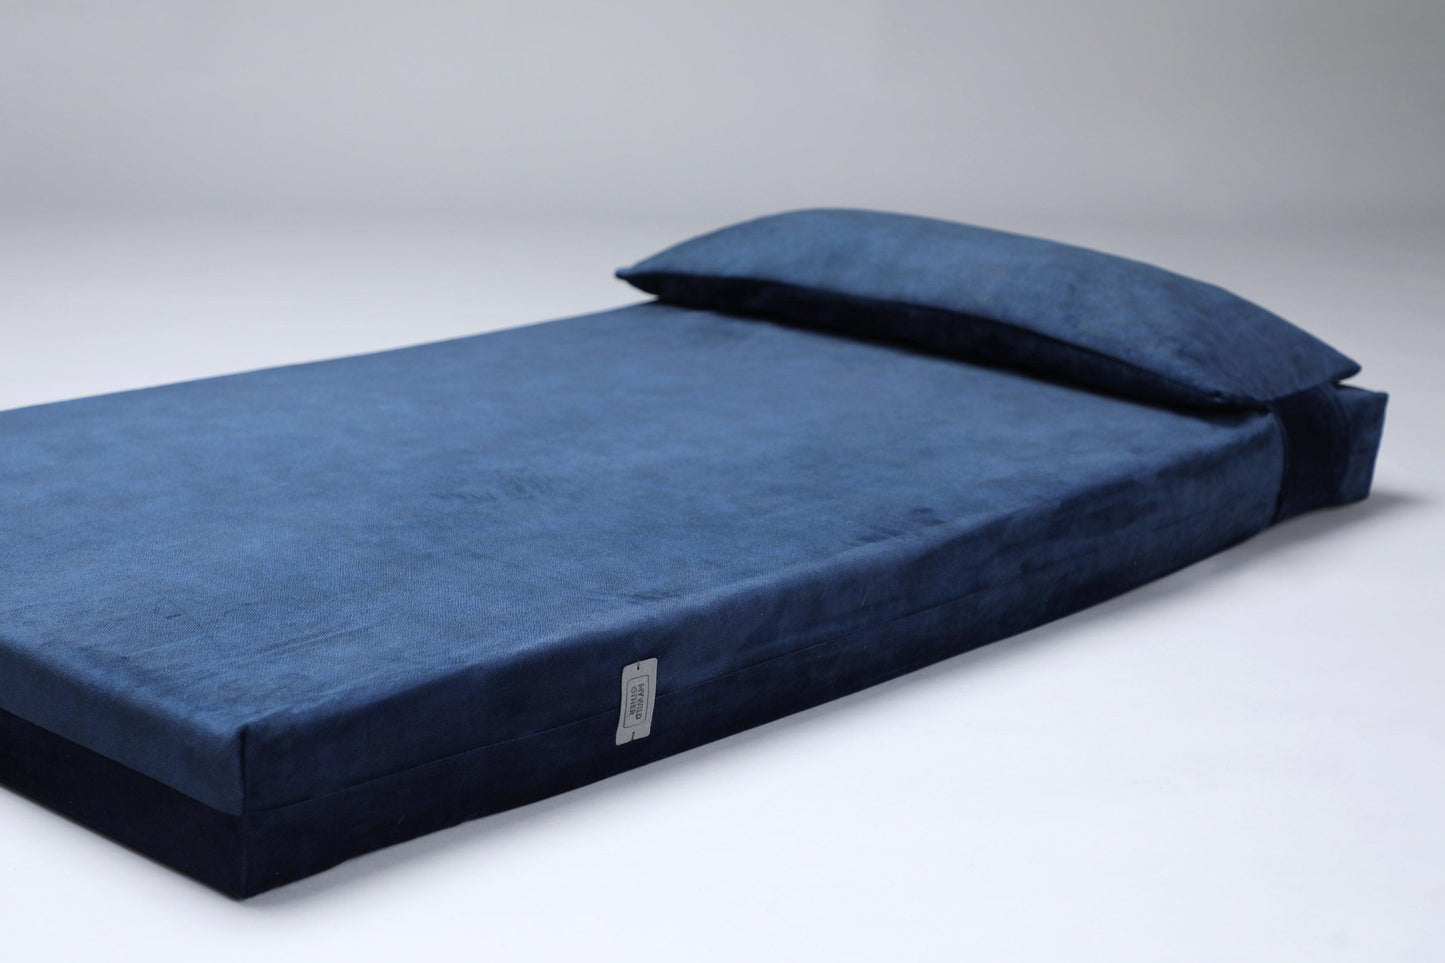 Dog bed for large dogs | Extra comfort & support | 2-sided | ROYAL BLUE - premium dog goods handmade in Europe by My Wild Other